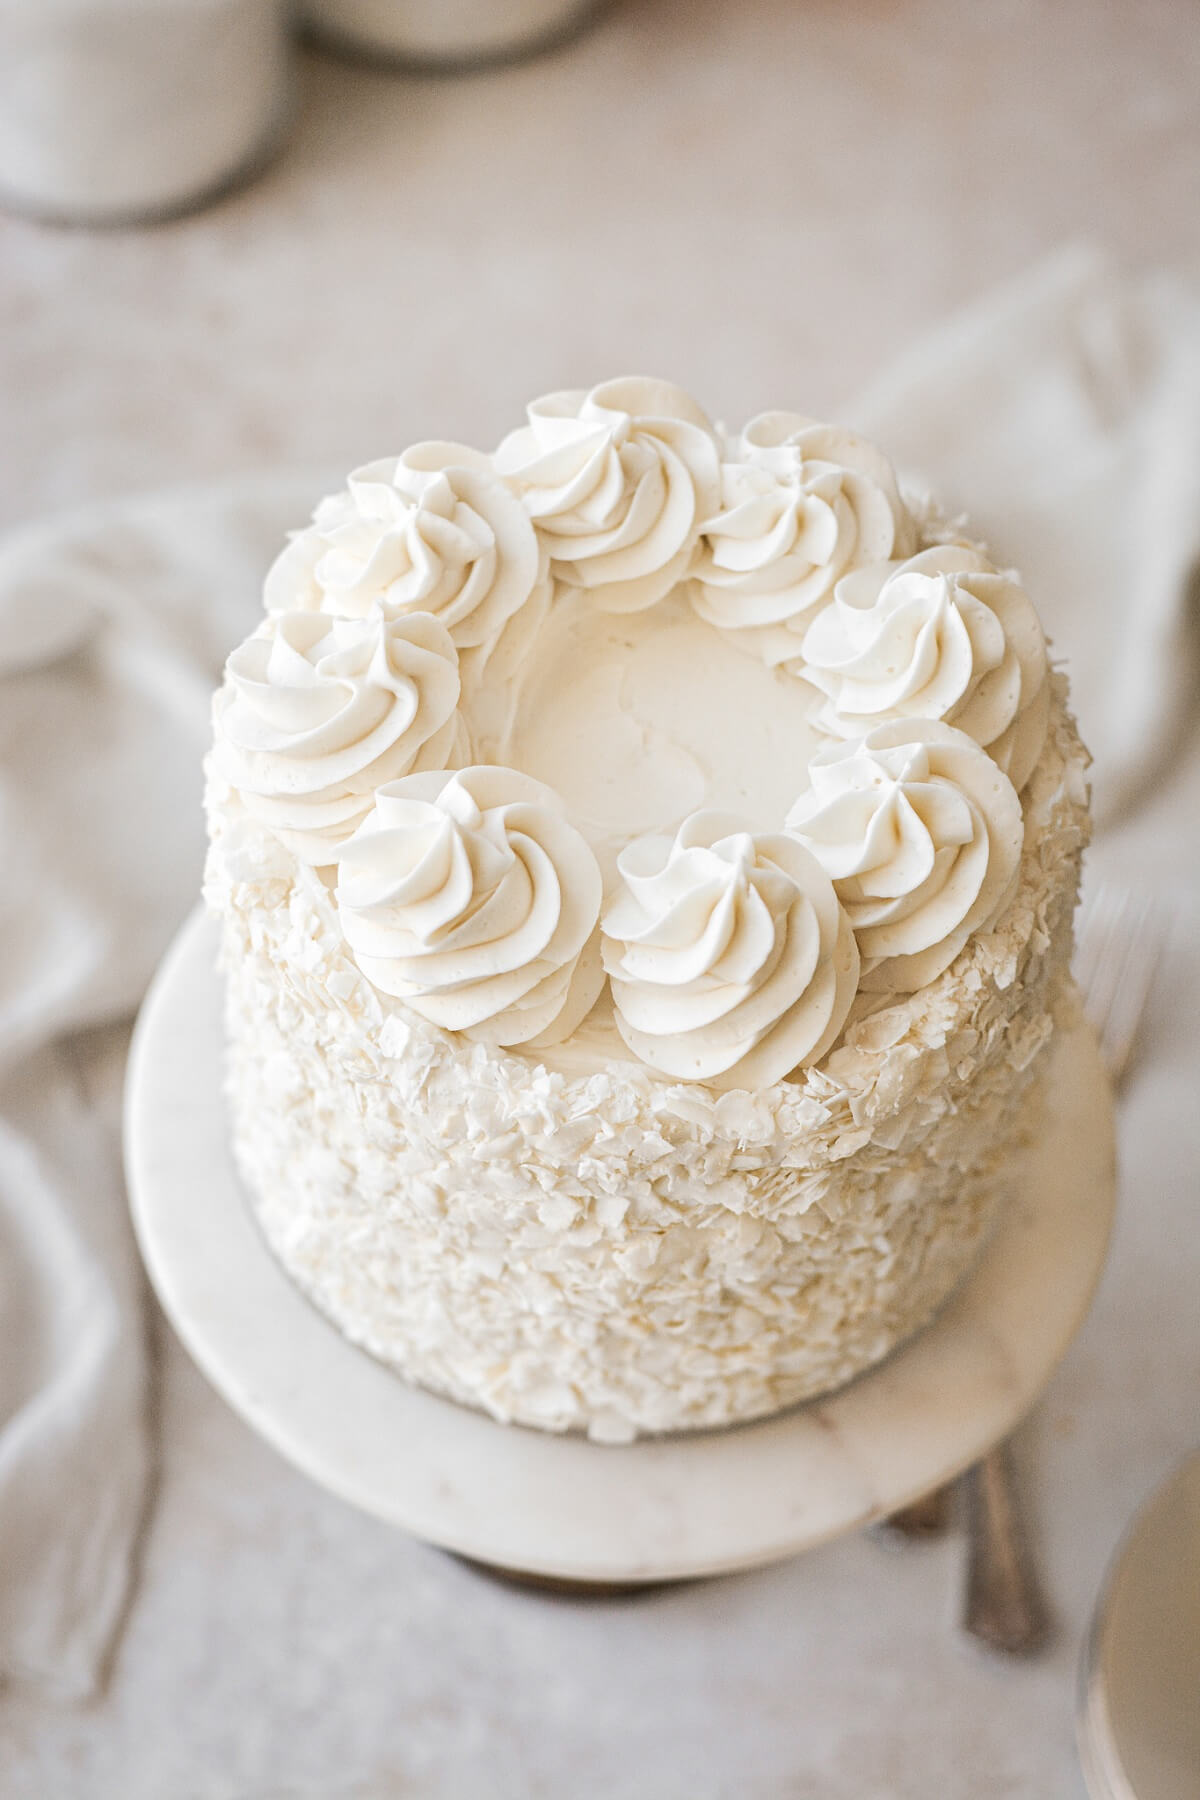 Top view of buttercream swirls on a coconut cake.